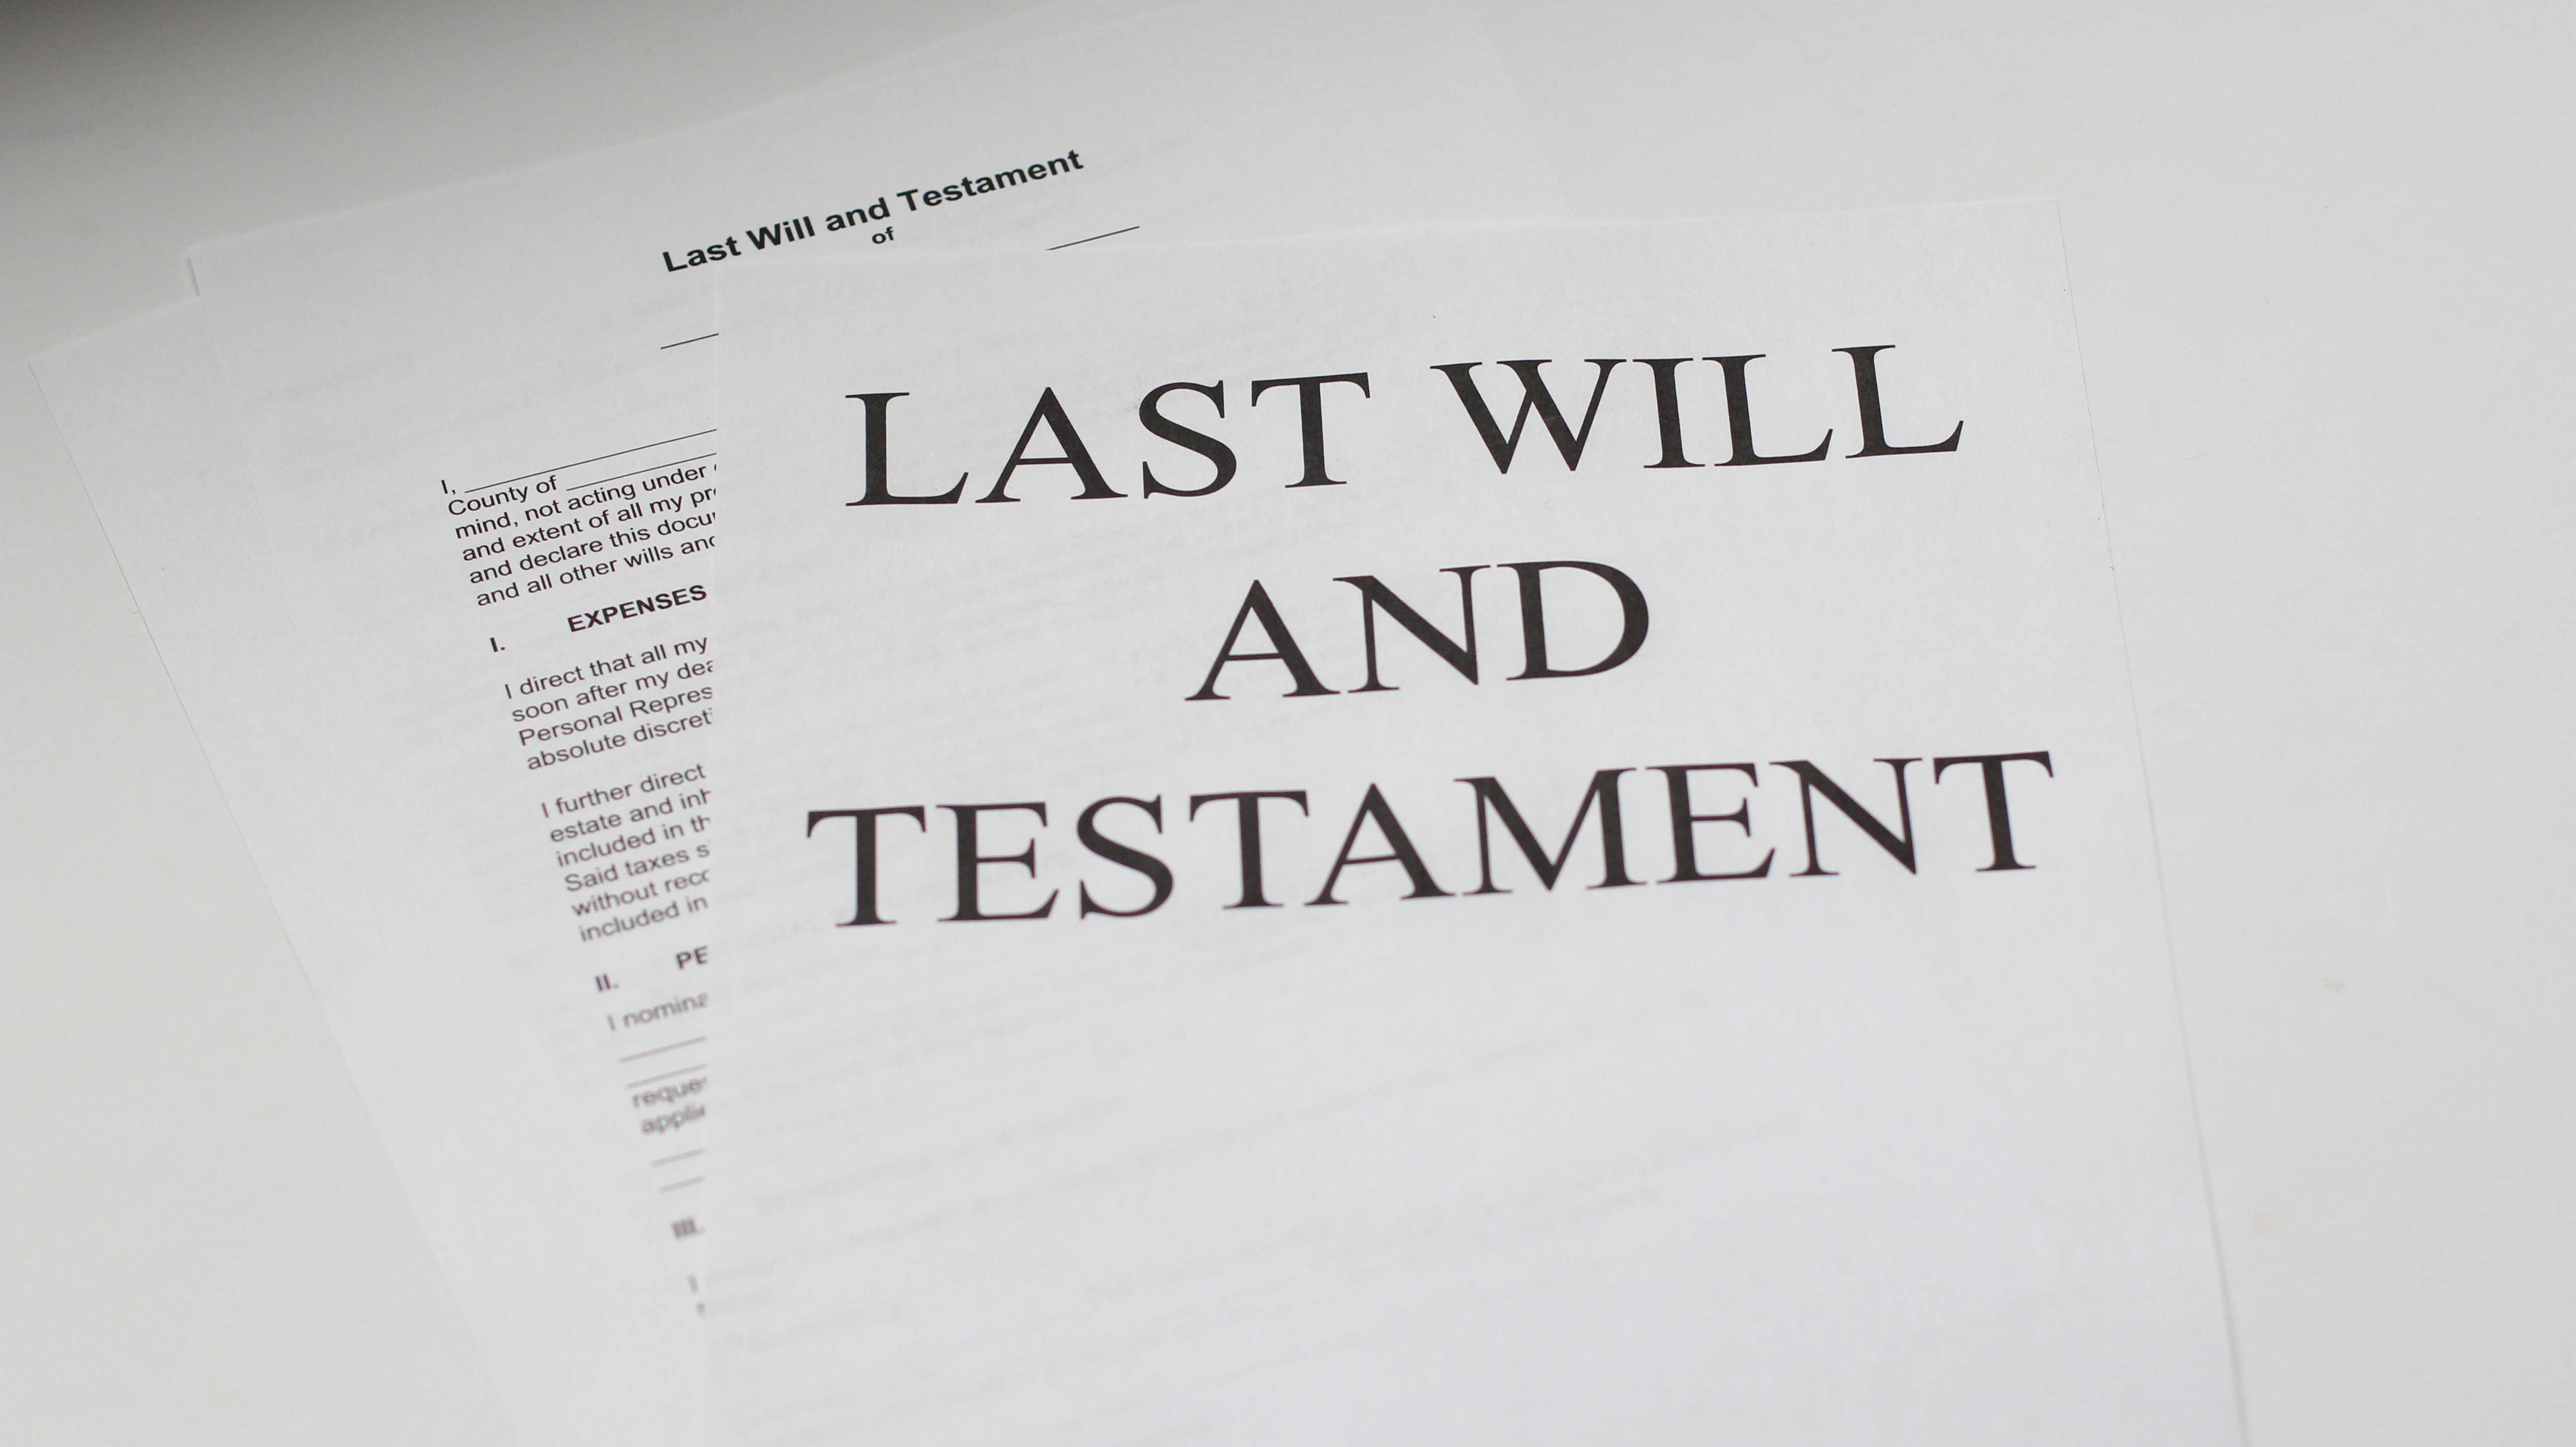 A paper draft of a last will and testament